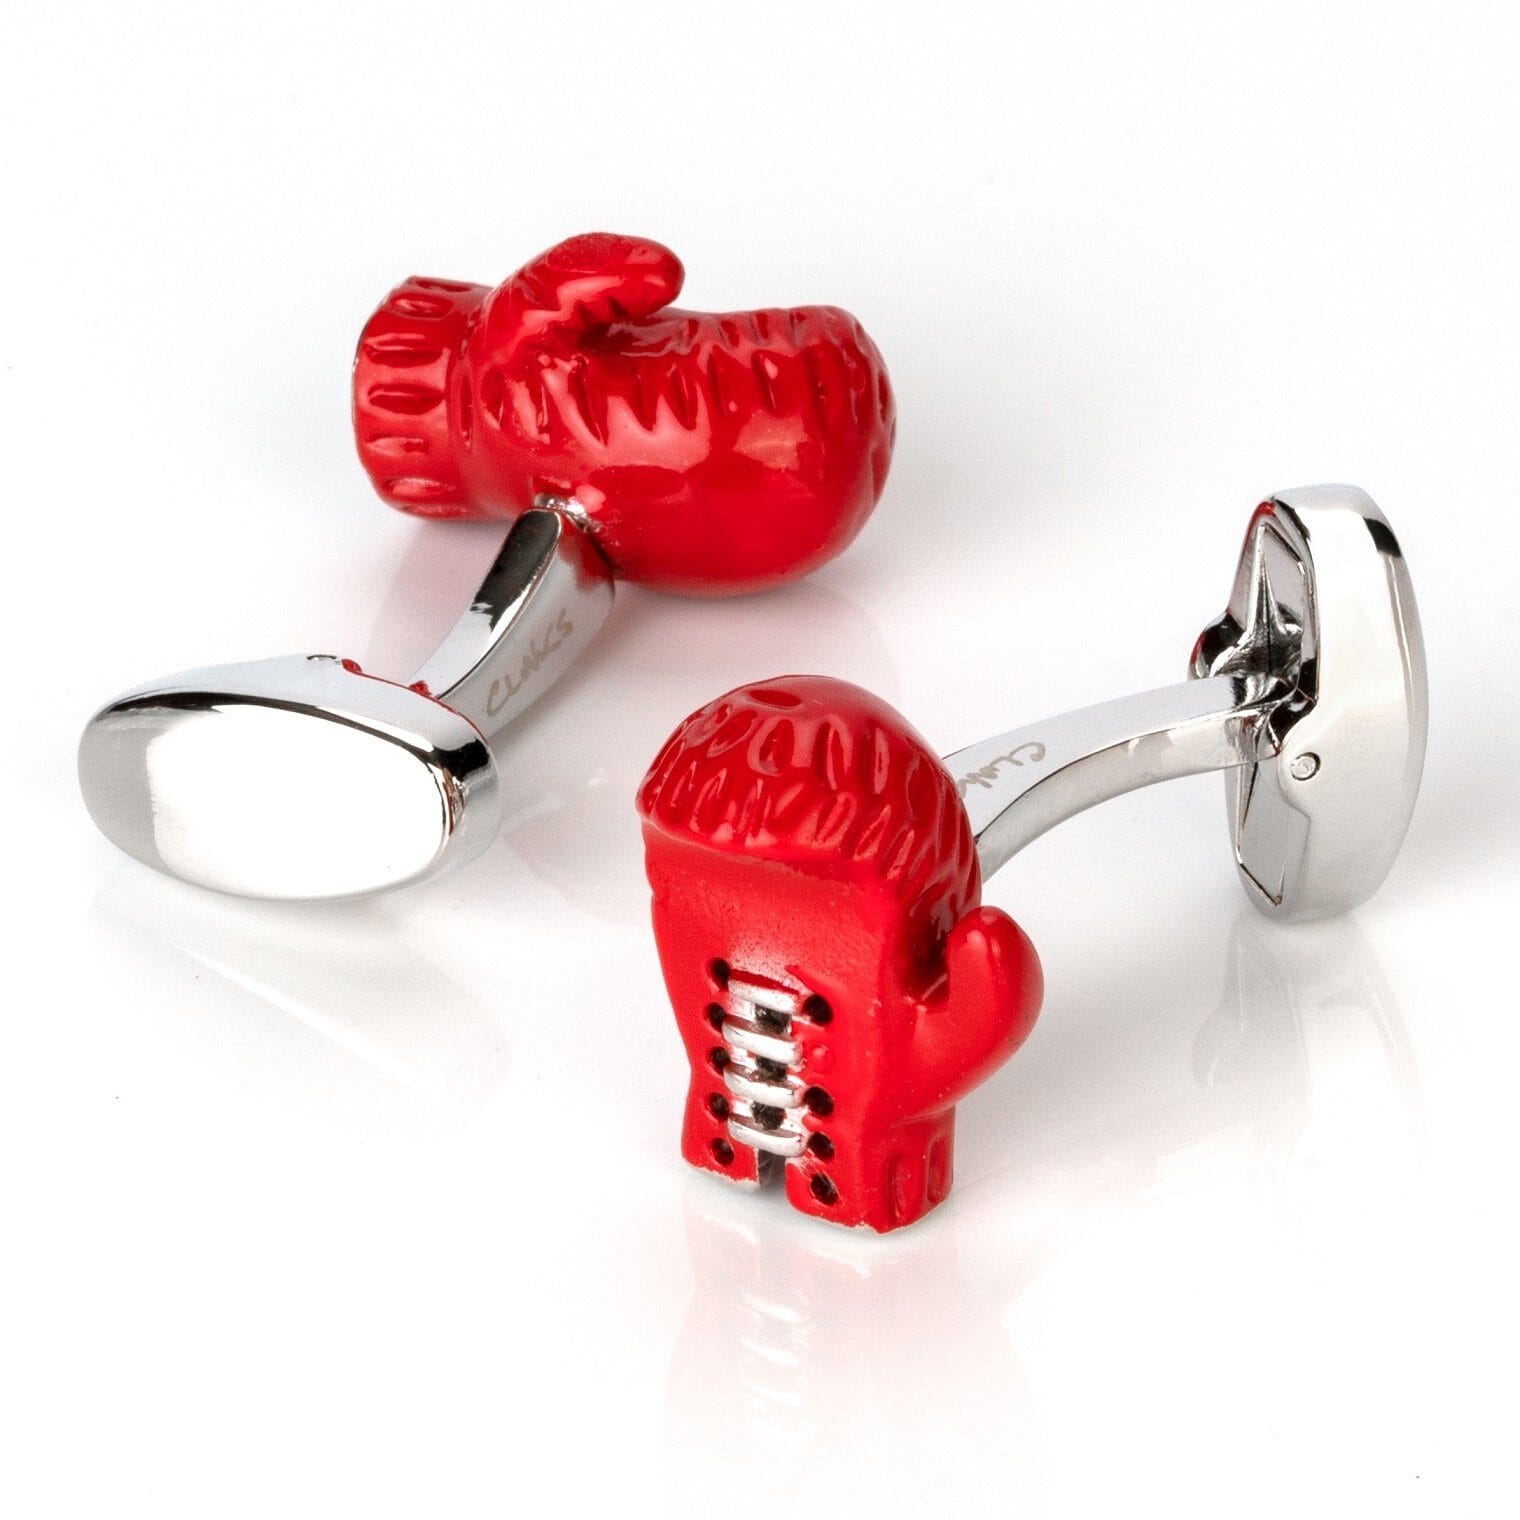 Red Boxing Gloves with Silver Laces Cufflinks Novelty Cufflinks Clinks Australia Red Boxing Gloves with Silver Laces Cufflinks 